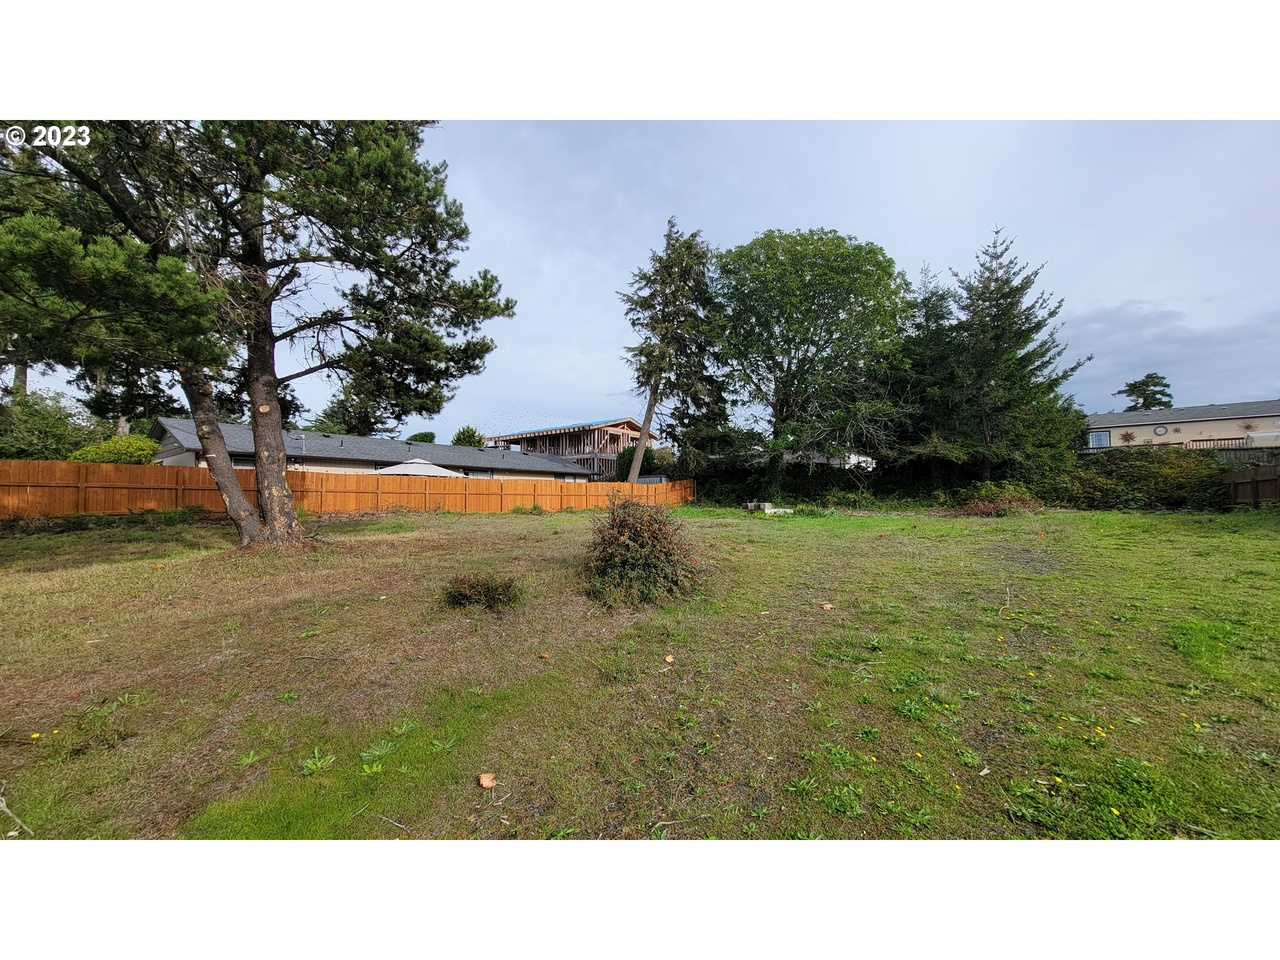 451 S Marple St, Coos Bay, OR 97420 | MLS# 23086121 | Redfin